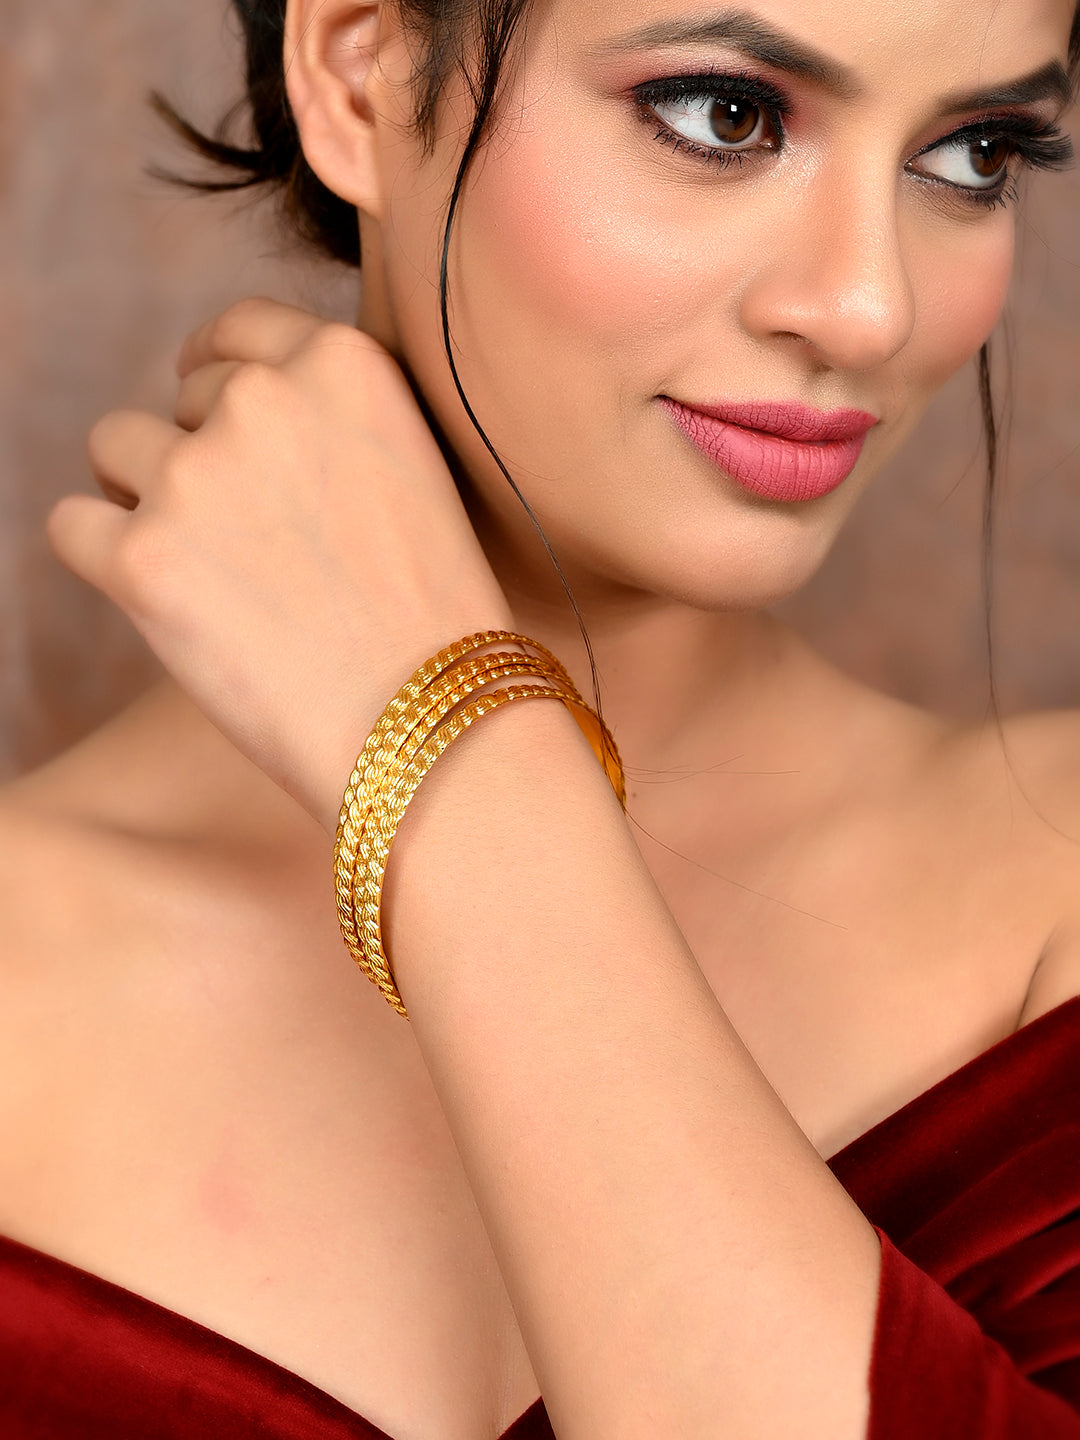 Set Of 4 Gold Plated Casual Handcrafted Bangles